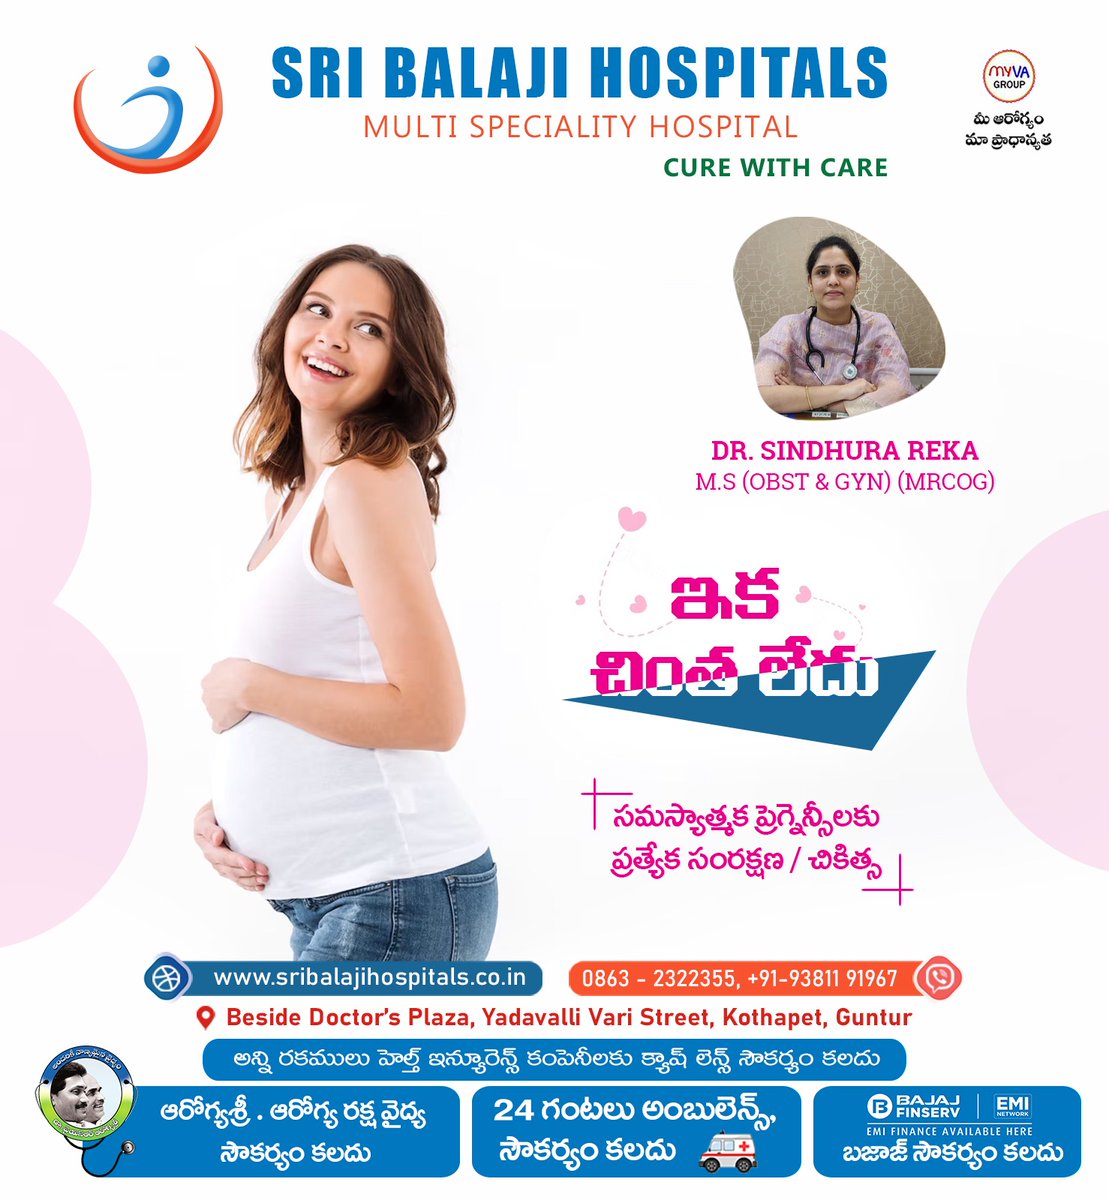 Expert Care for High-Risk Pregnancy: Consult Our Doctor Today!

#BestHospitality #sribalajihospitals #SriBalajiHospital #curewithcare #highriskpregnancy #drsindhura #drsindhurareka